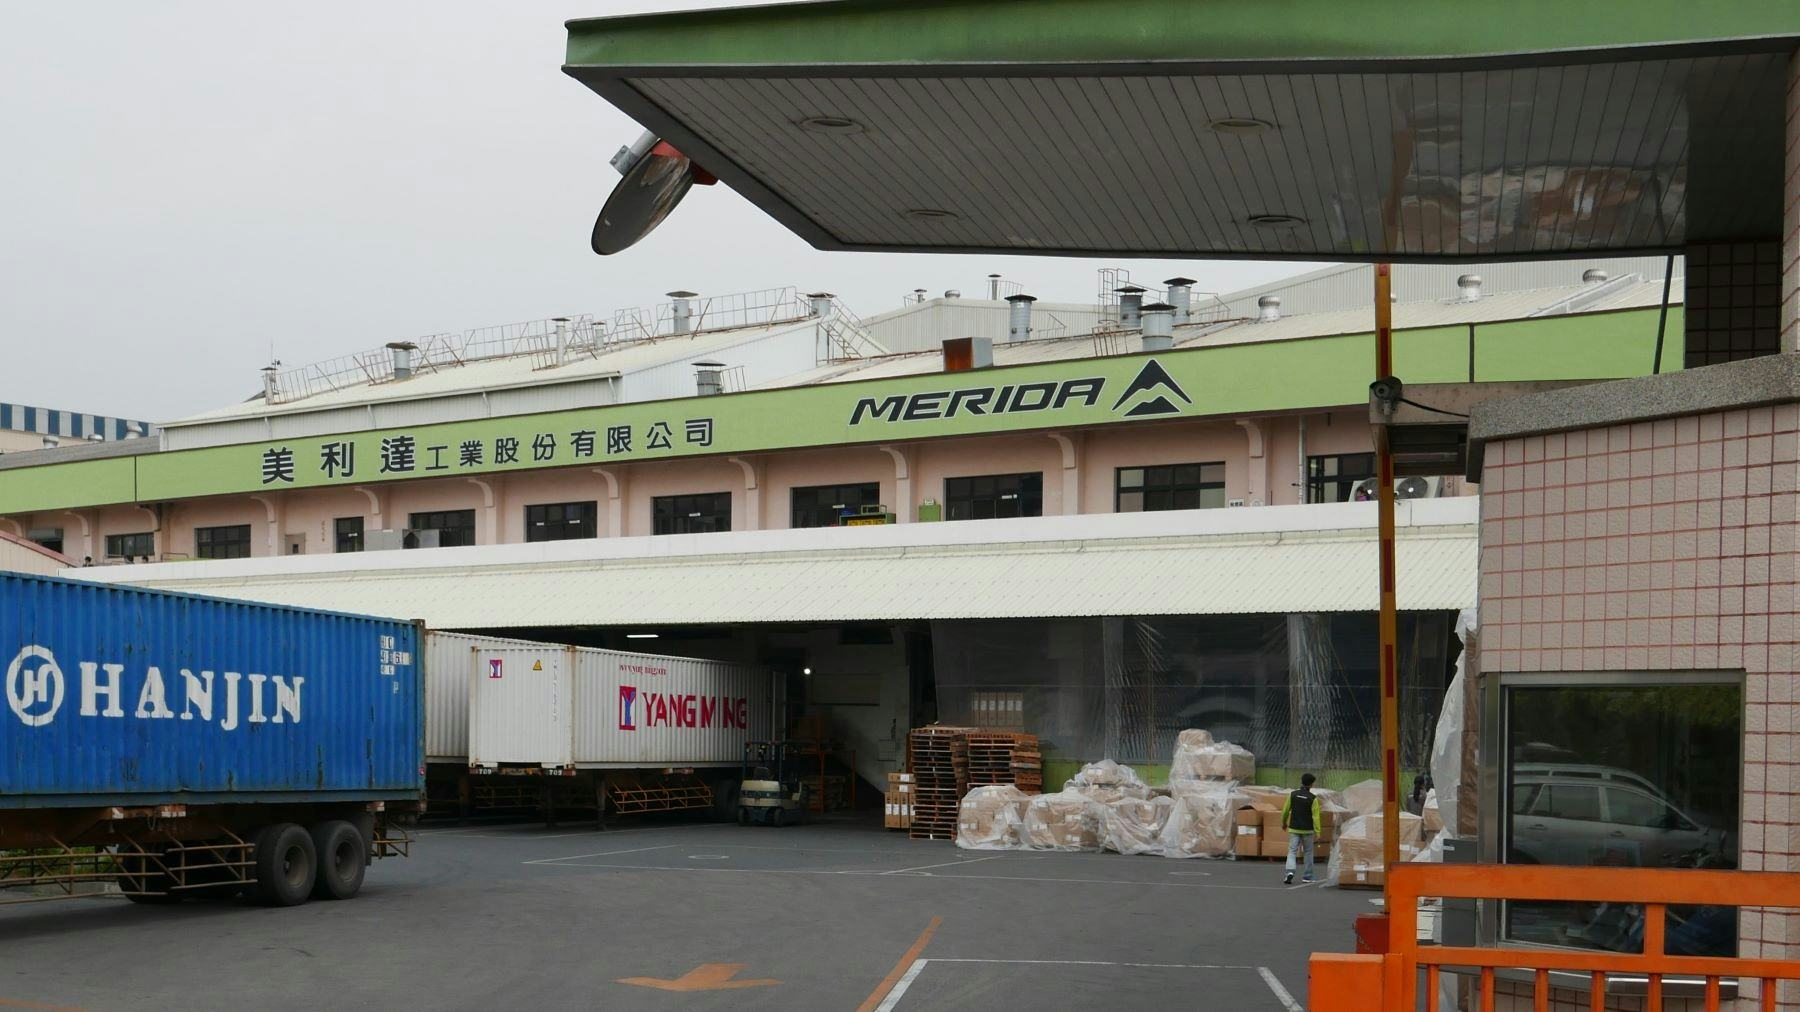 Merida's headquarters and high-quality private label and OEM production are still located in Dacun Township in Changhua County. – Photo Jo Beckendorff